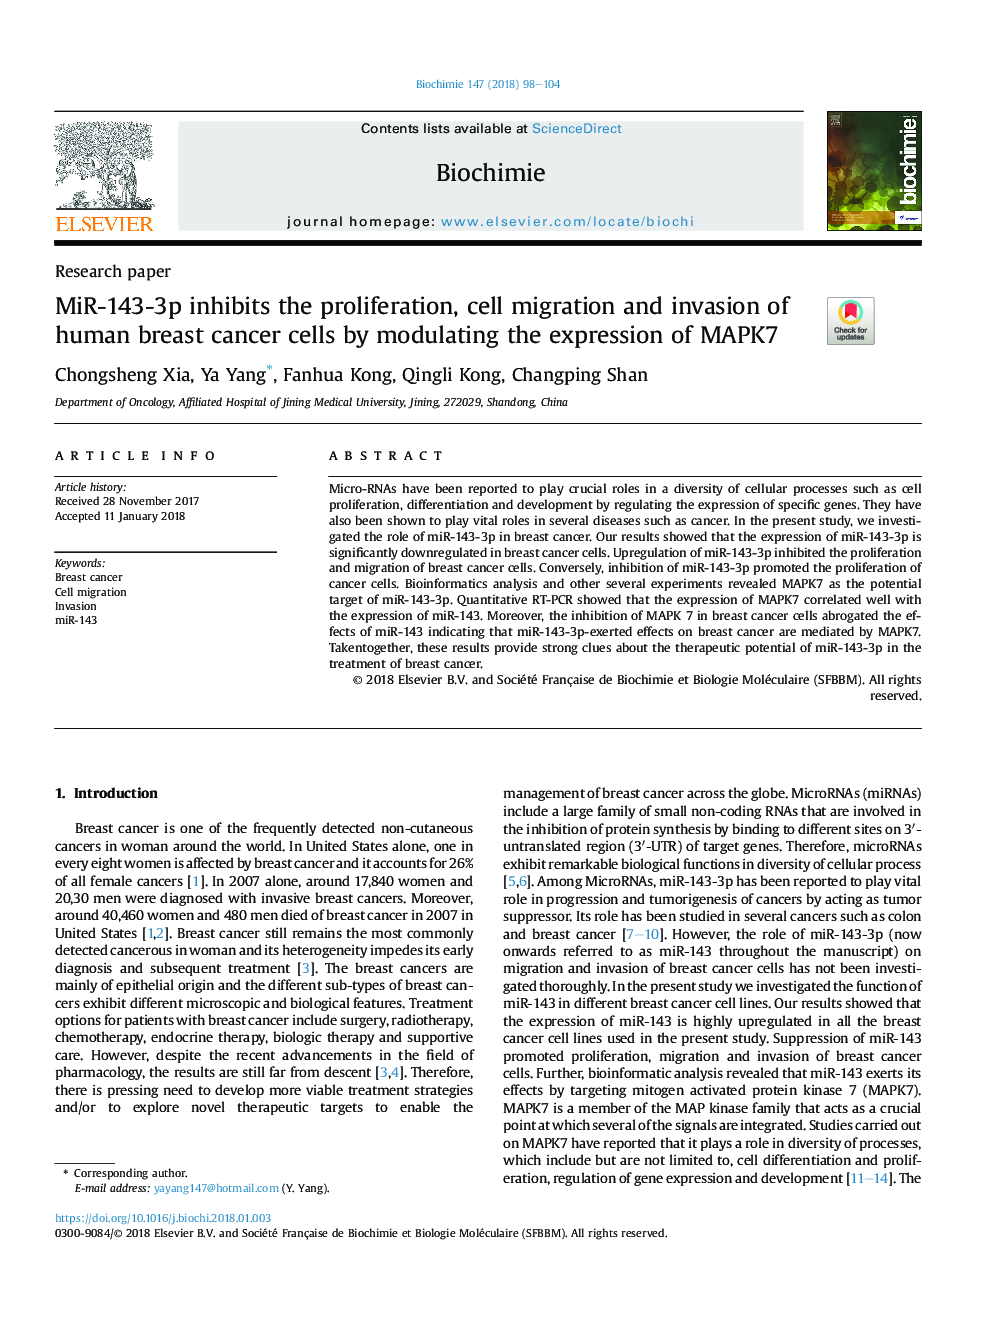 MiR-143-3p inhibits the proliferation, cell migration and invasion of human breast cancer cells by modulating the expression of MAPK7